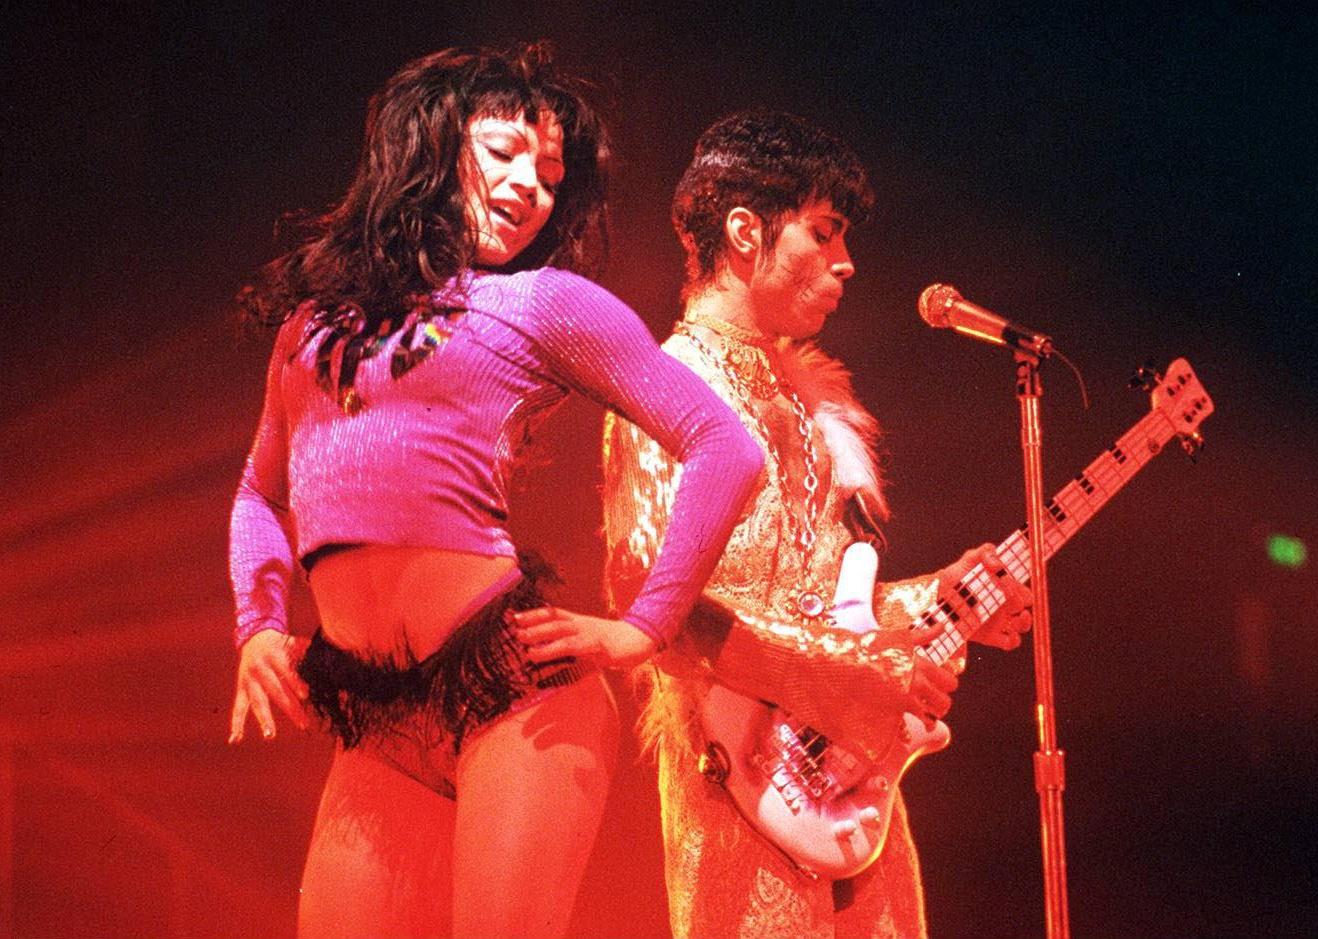 Prince with Mayte Garcia onstage.